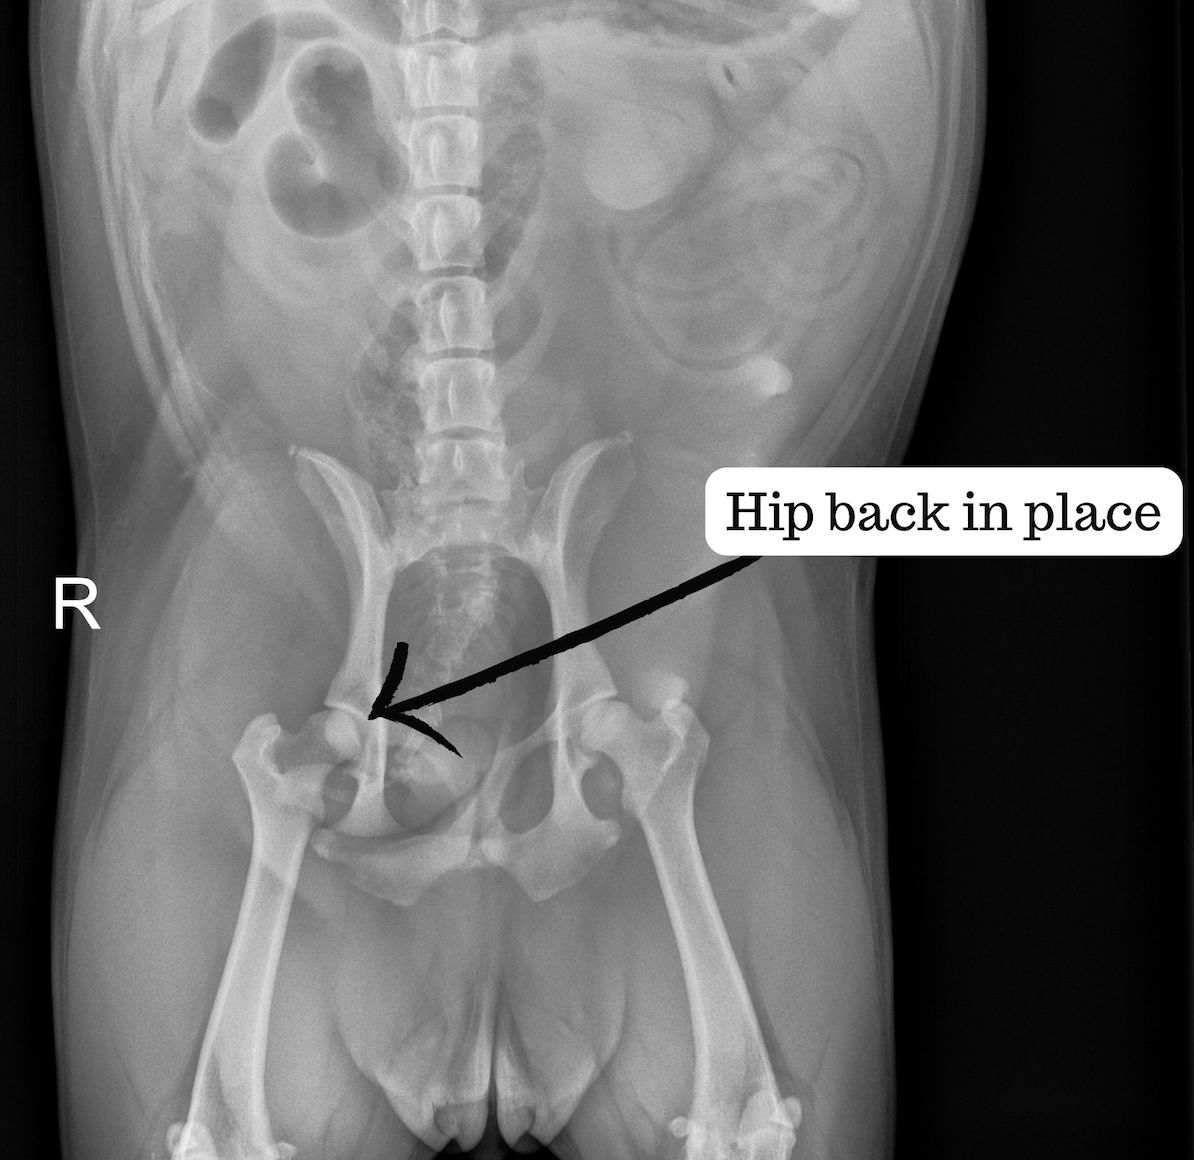 Xray after putting bone in place